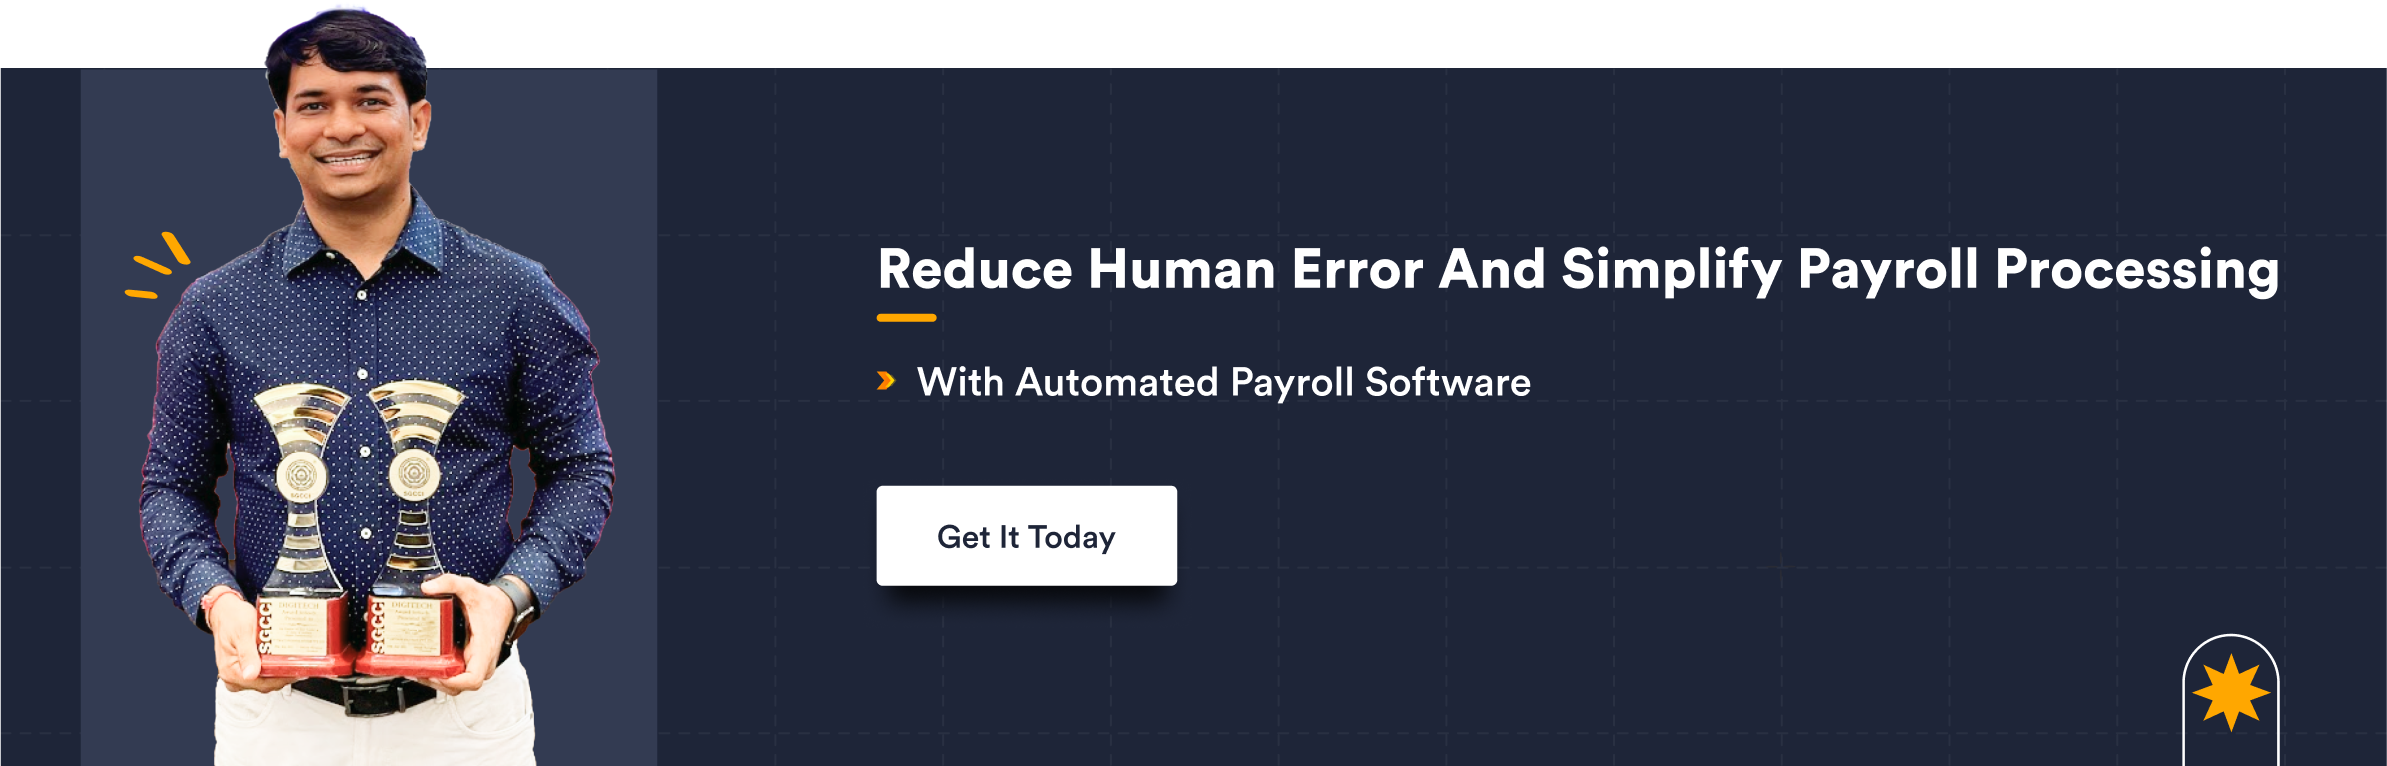 Reduce Human Error And Simplify Payroll Processing